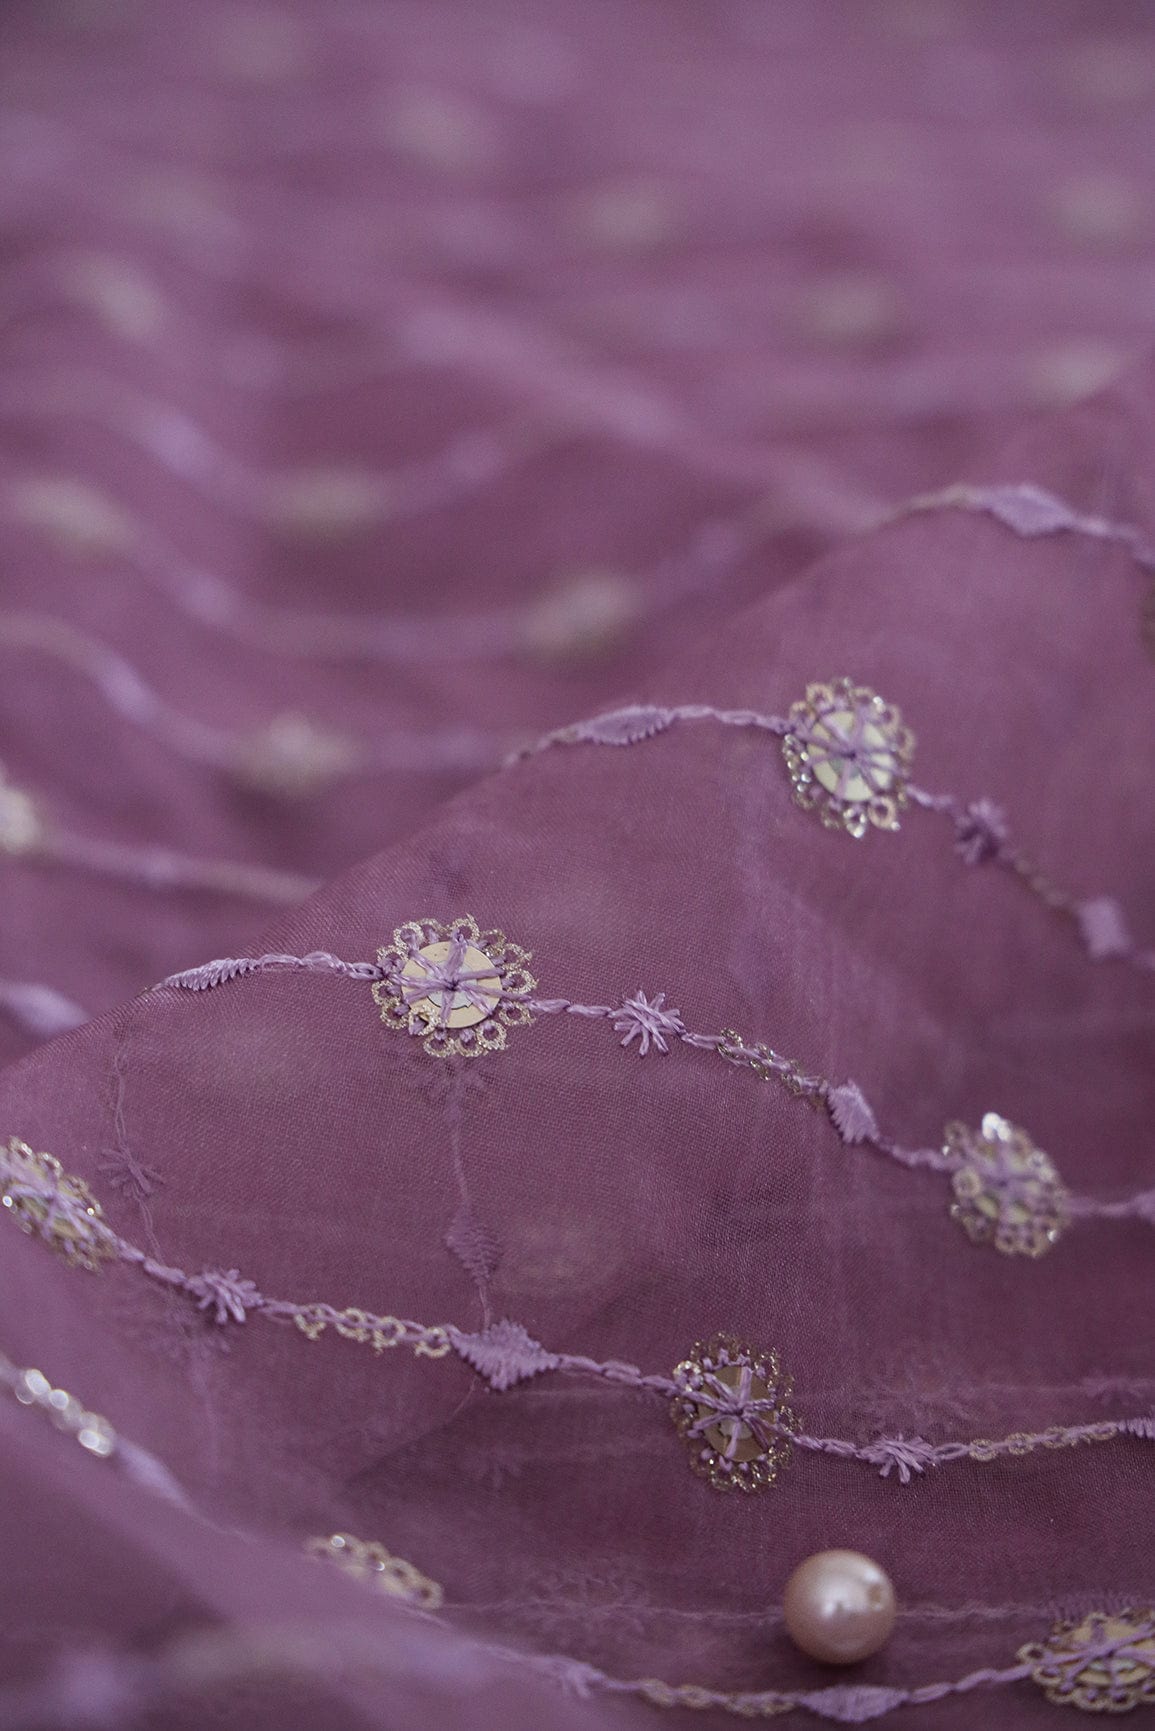 doeraa Embroidery Fabrics 4 Meter Cut Piece Of Gold Sequins With Lavender Thread Embroidery On Purple Organza Fabric